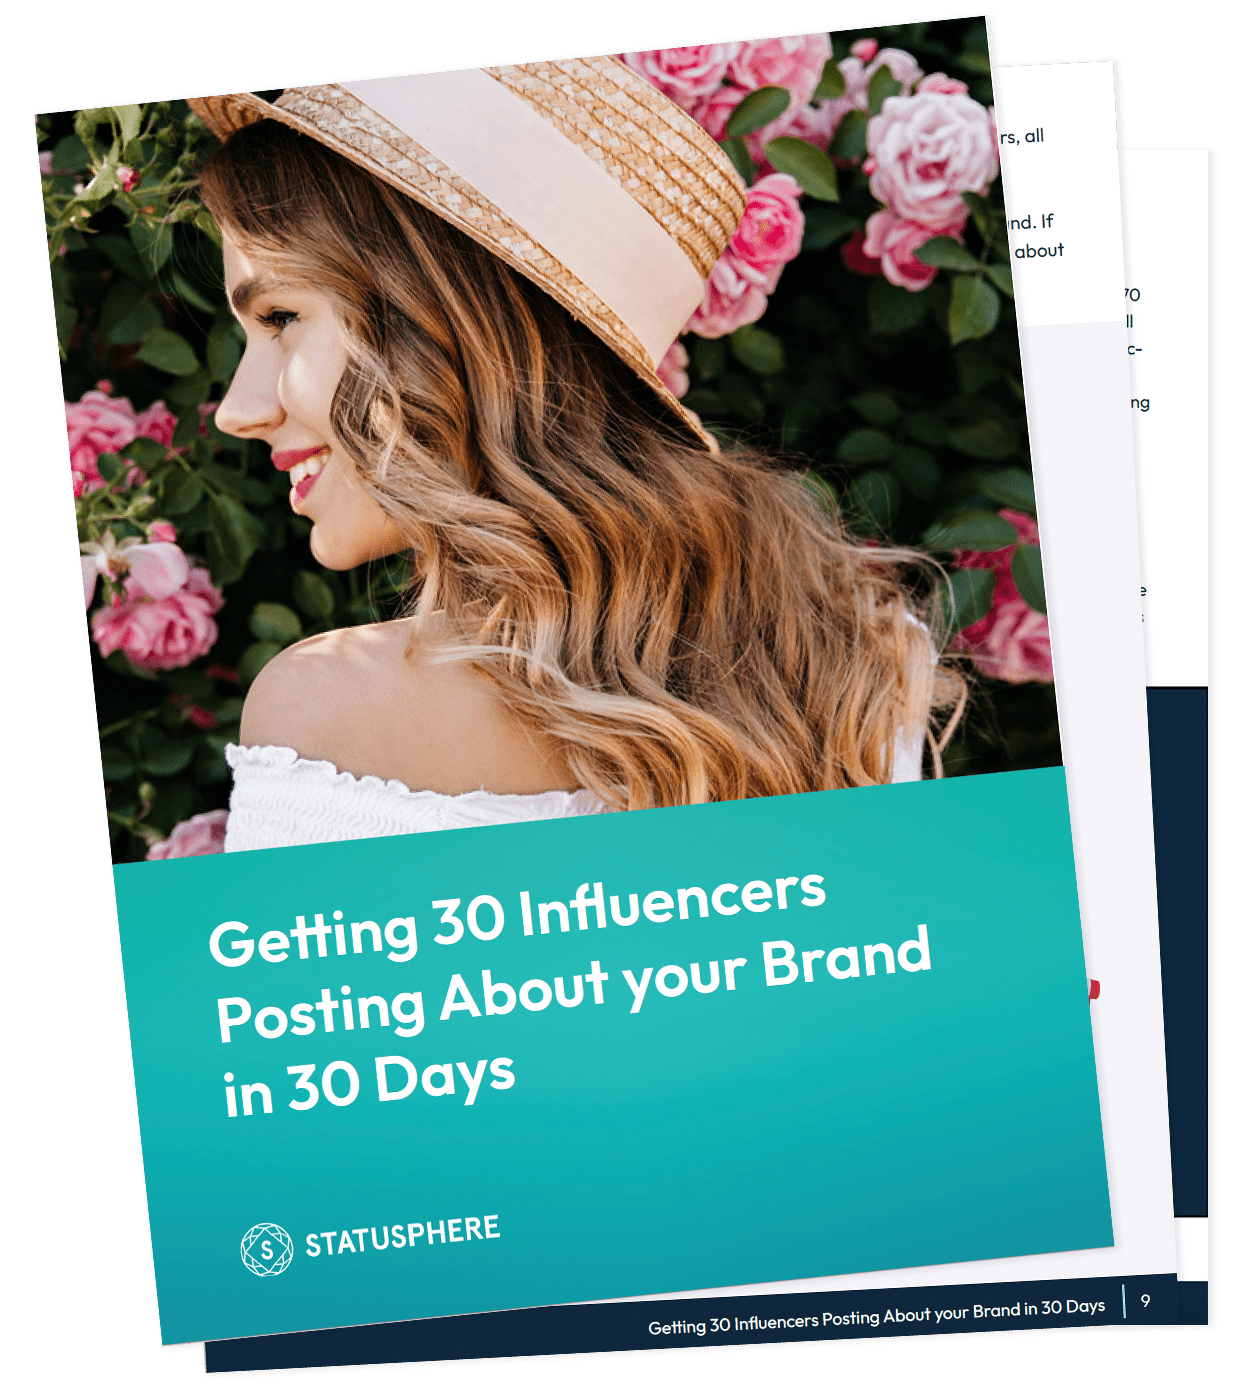 The Guide to Getting 30 Influencers Posting About Your Brand in 30 Days